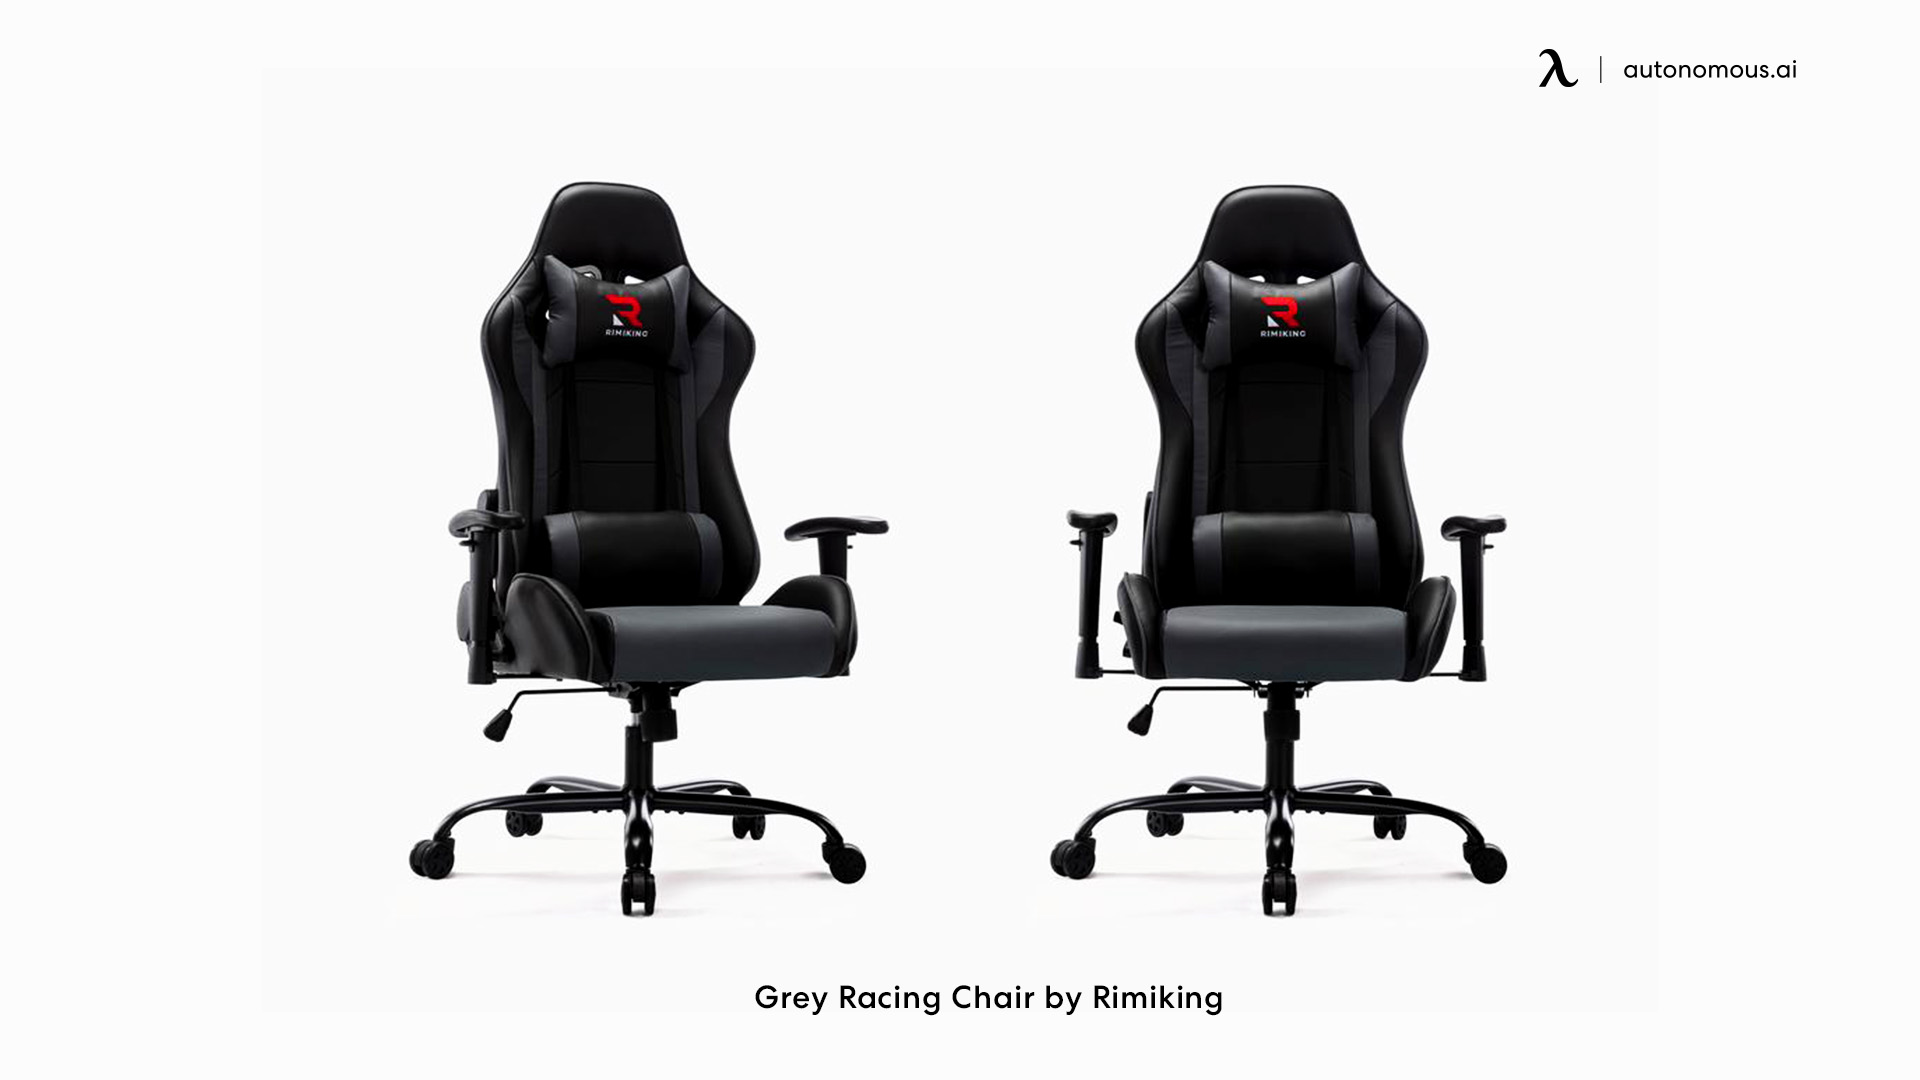 Grey Racing Chair by Rimiking